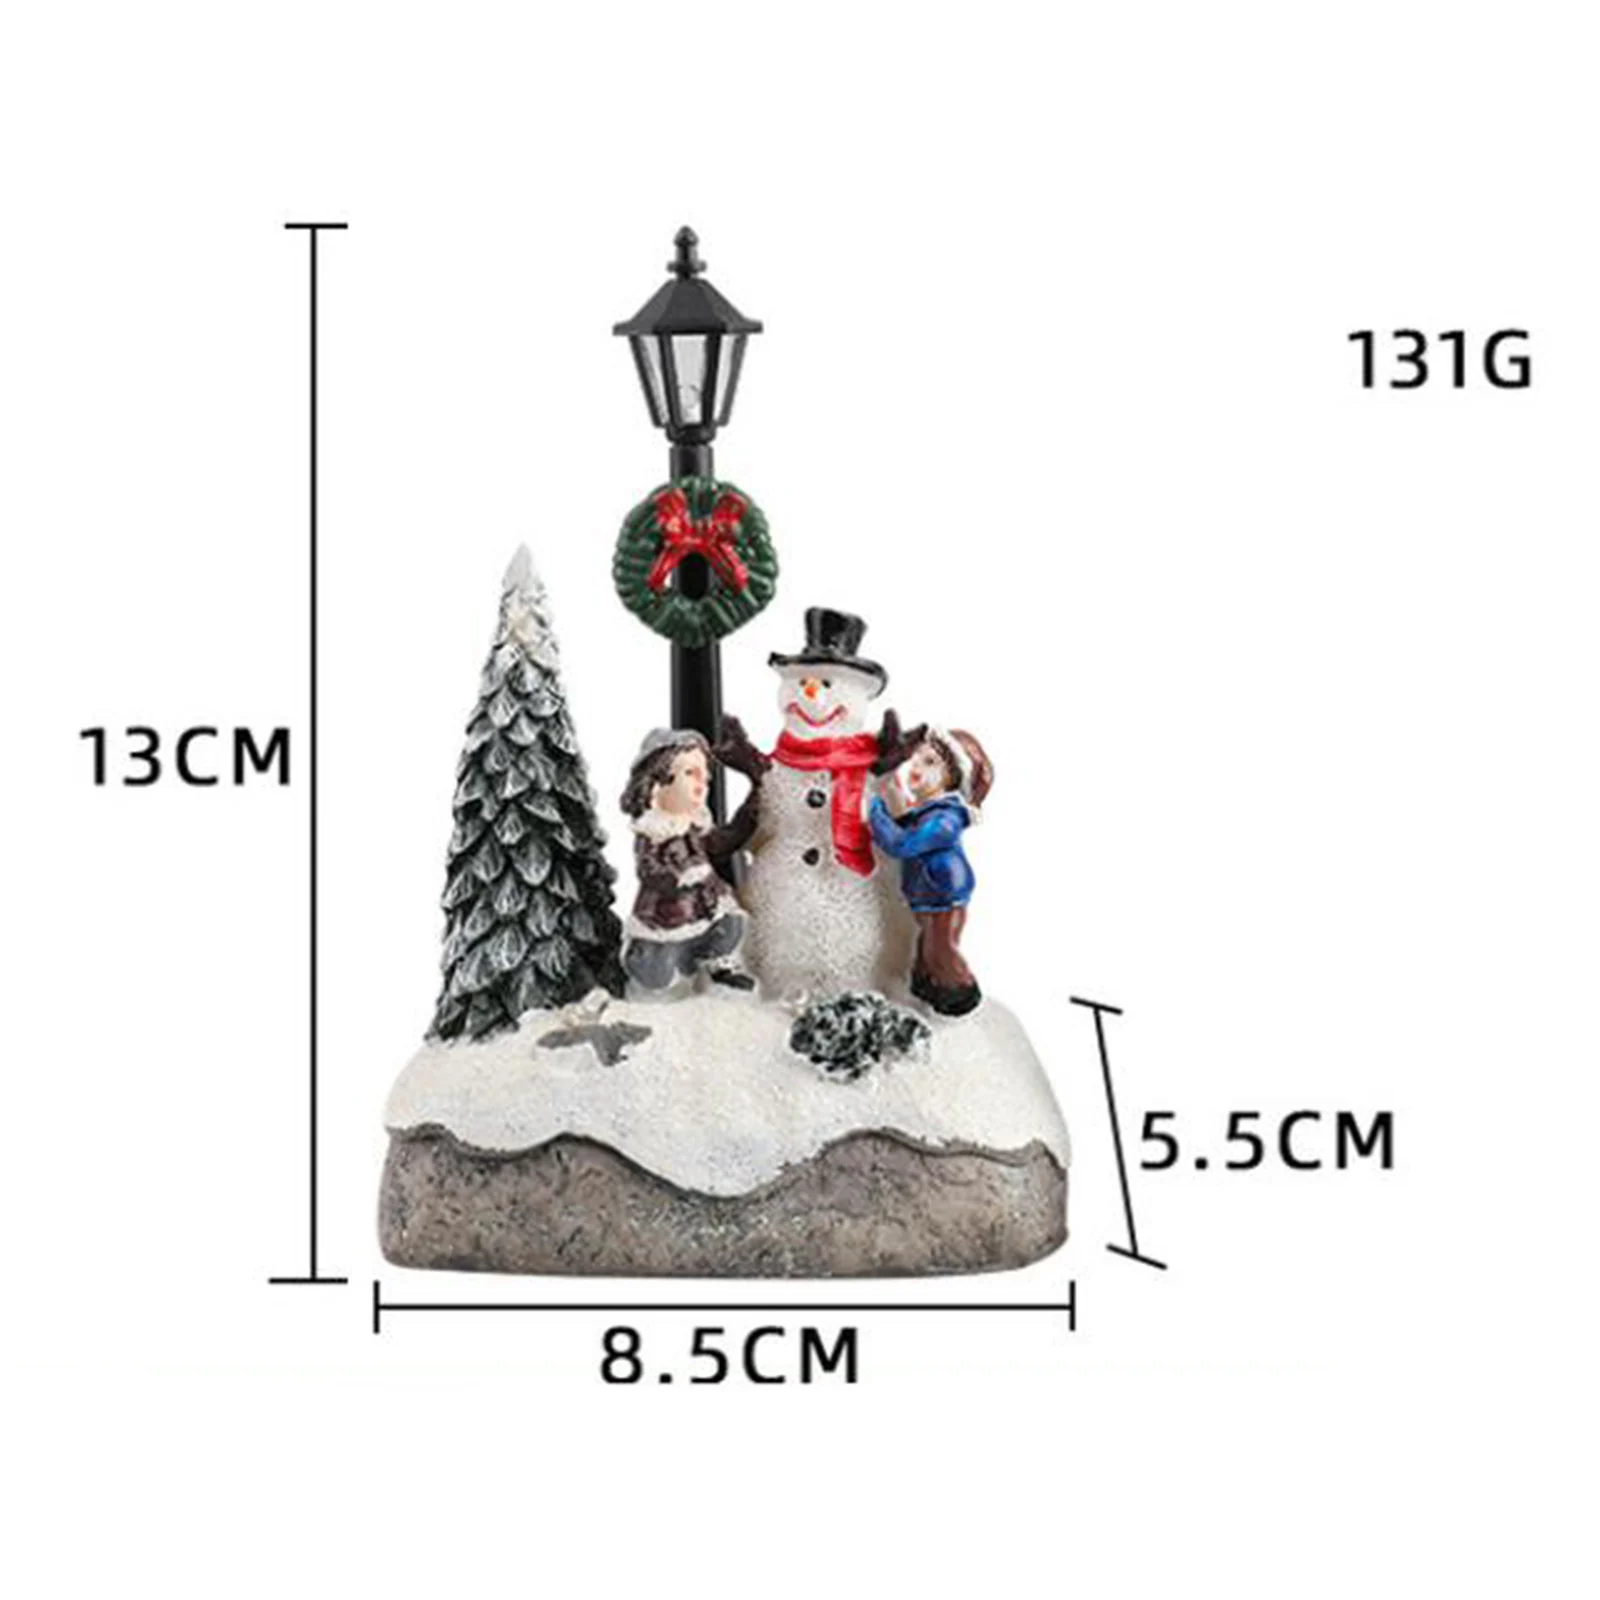 Christmas Scene Village Houses Indoor Outdoor with LED Light Christmas Village Sets Micro Landscape for Christmas Decorations 